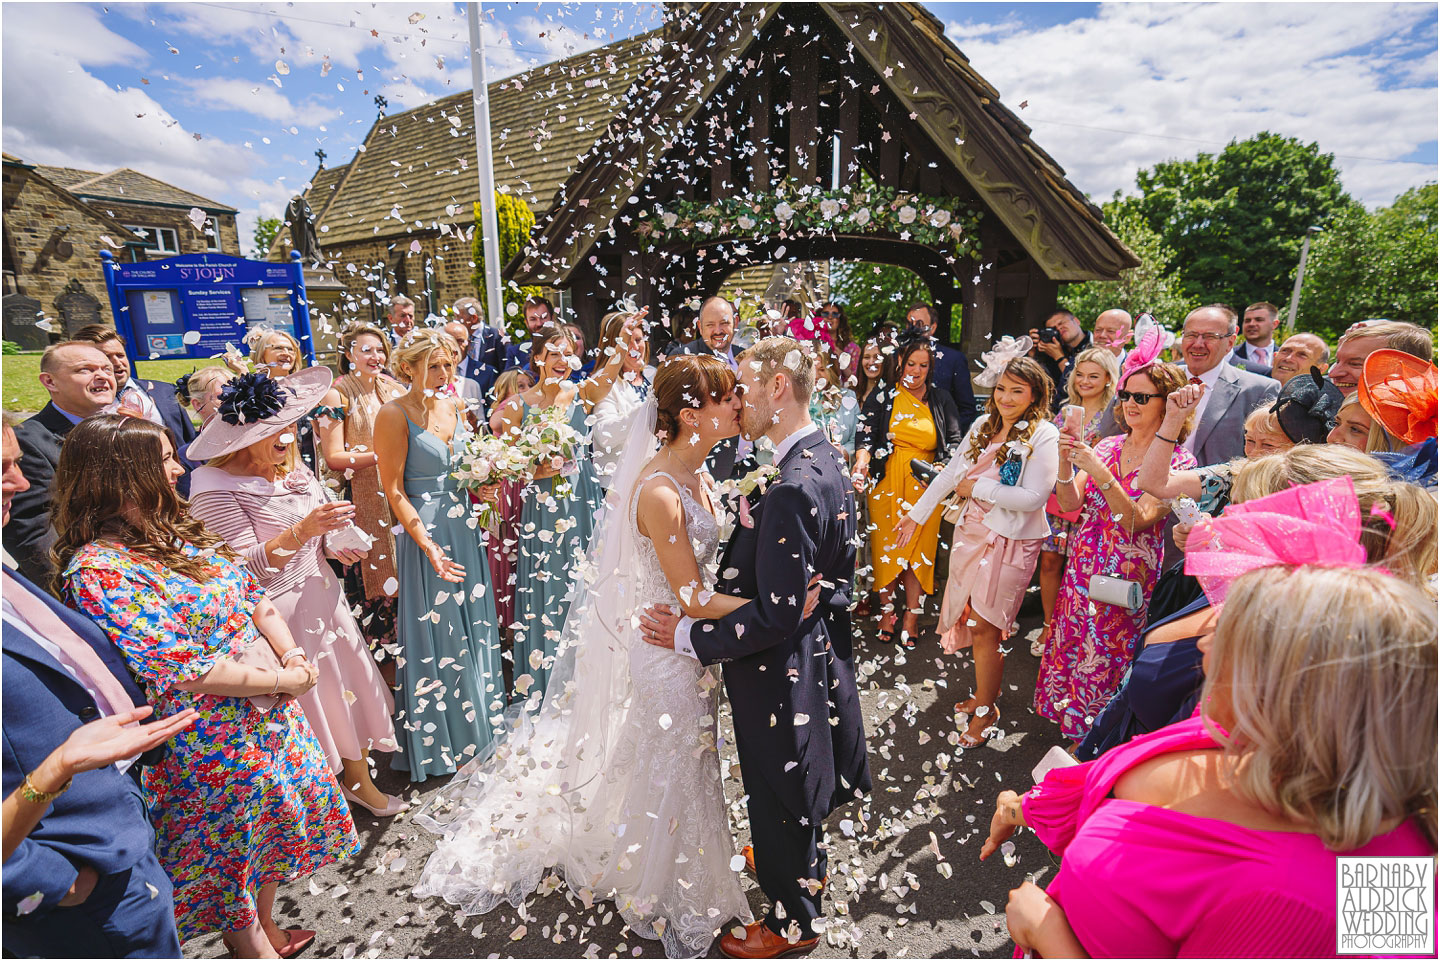 A bride and groom kiss under pastel coloured confetti outside the wedding ceremony at a church in Ilkley in Yorkshire